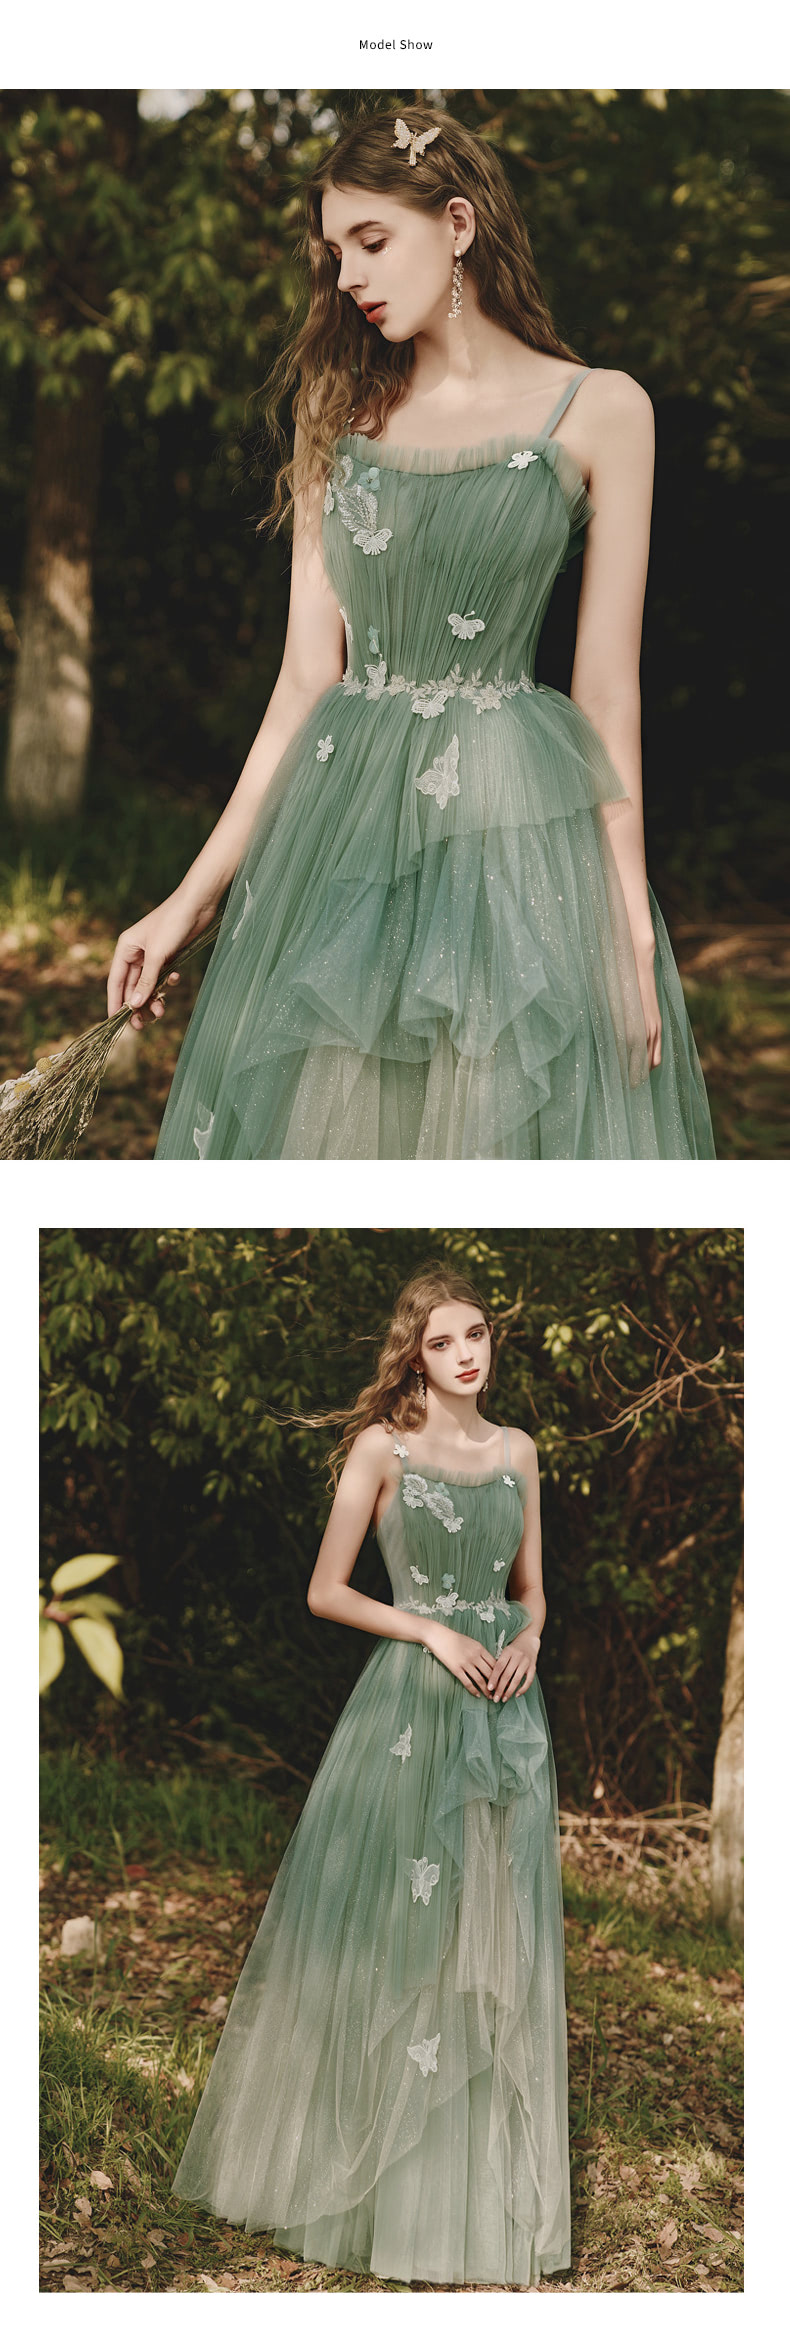 Fairy Avocado Green Tulle Prom Dress Princess Party Ball Gown10